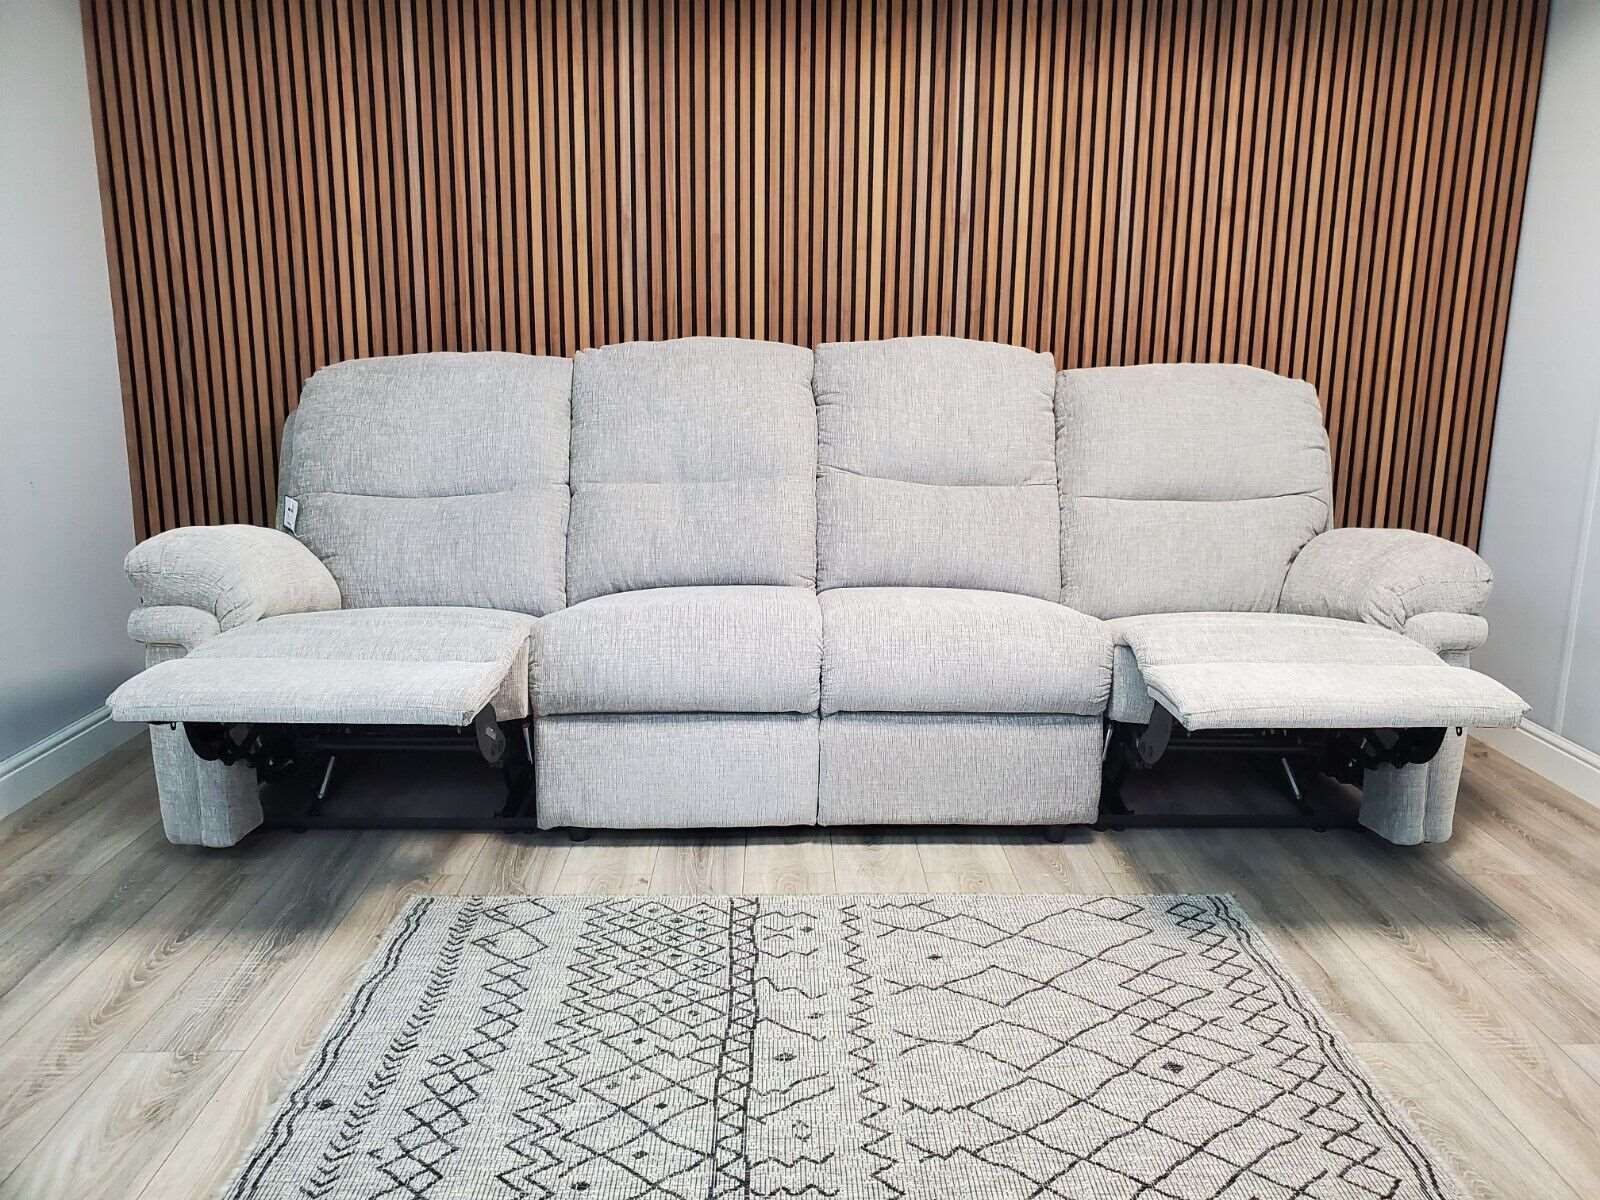 How To Take A Recliner Couch Apart